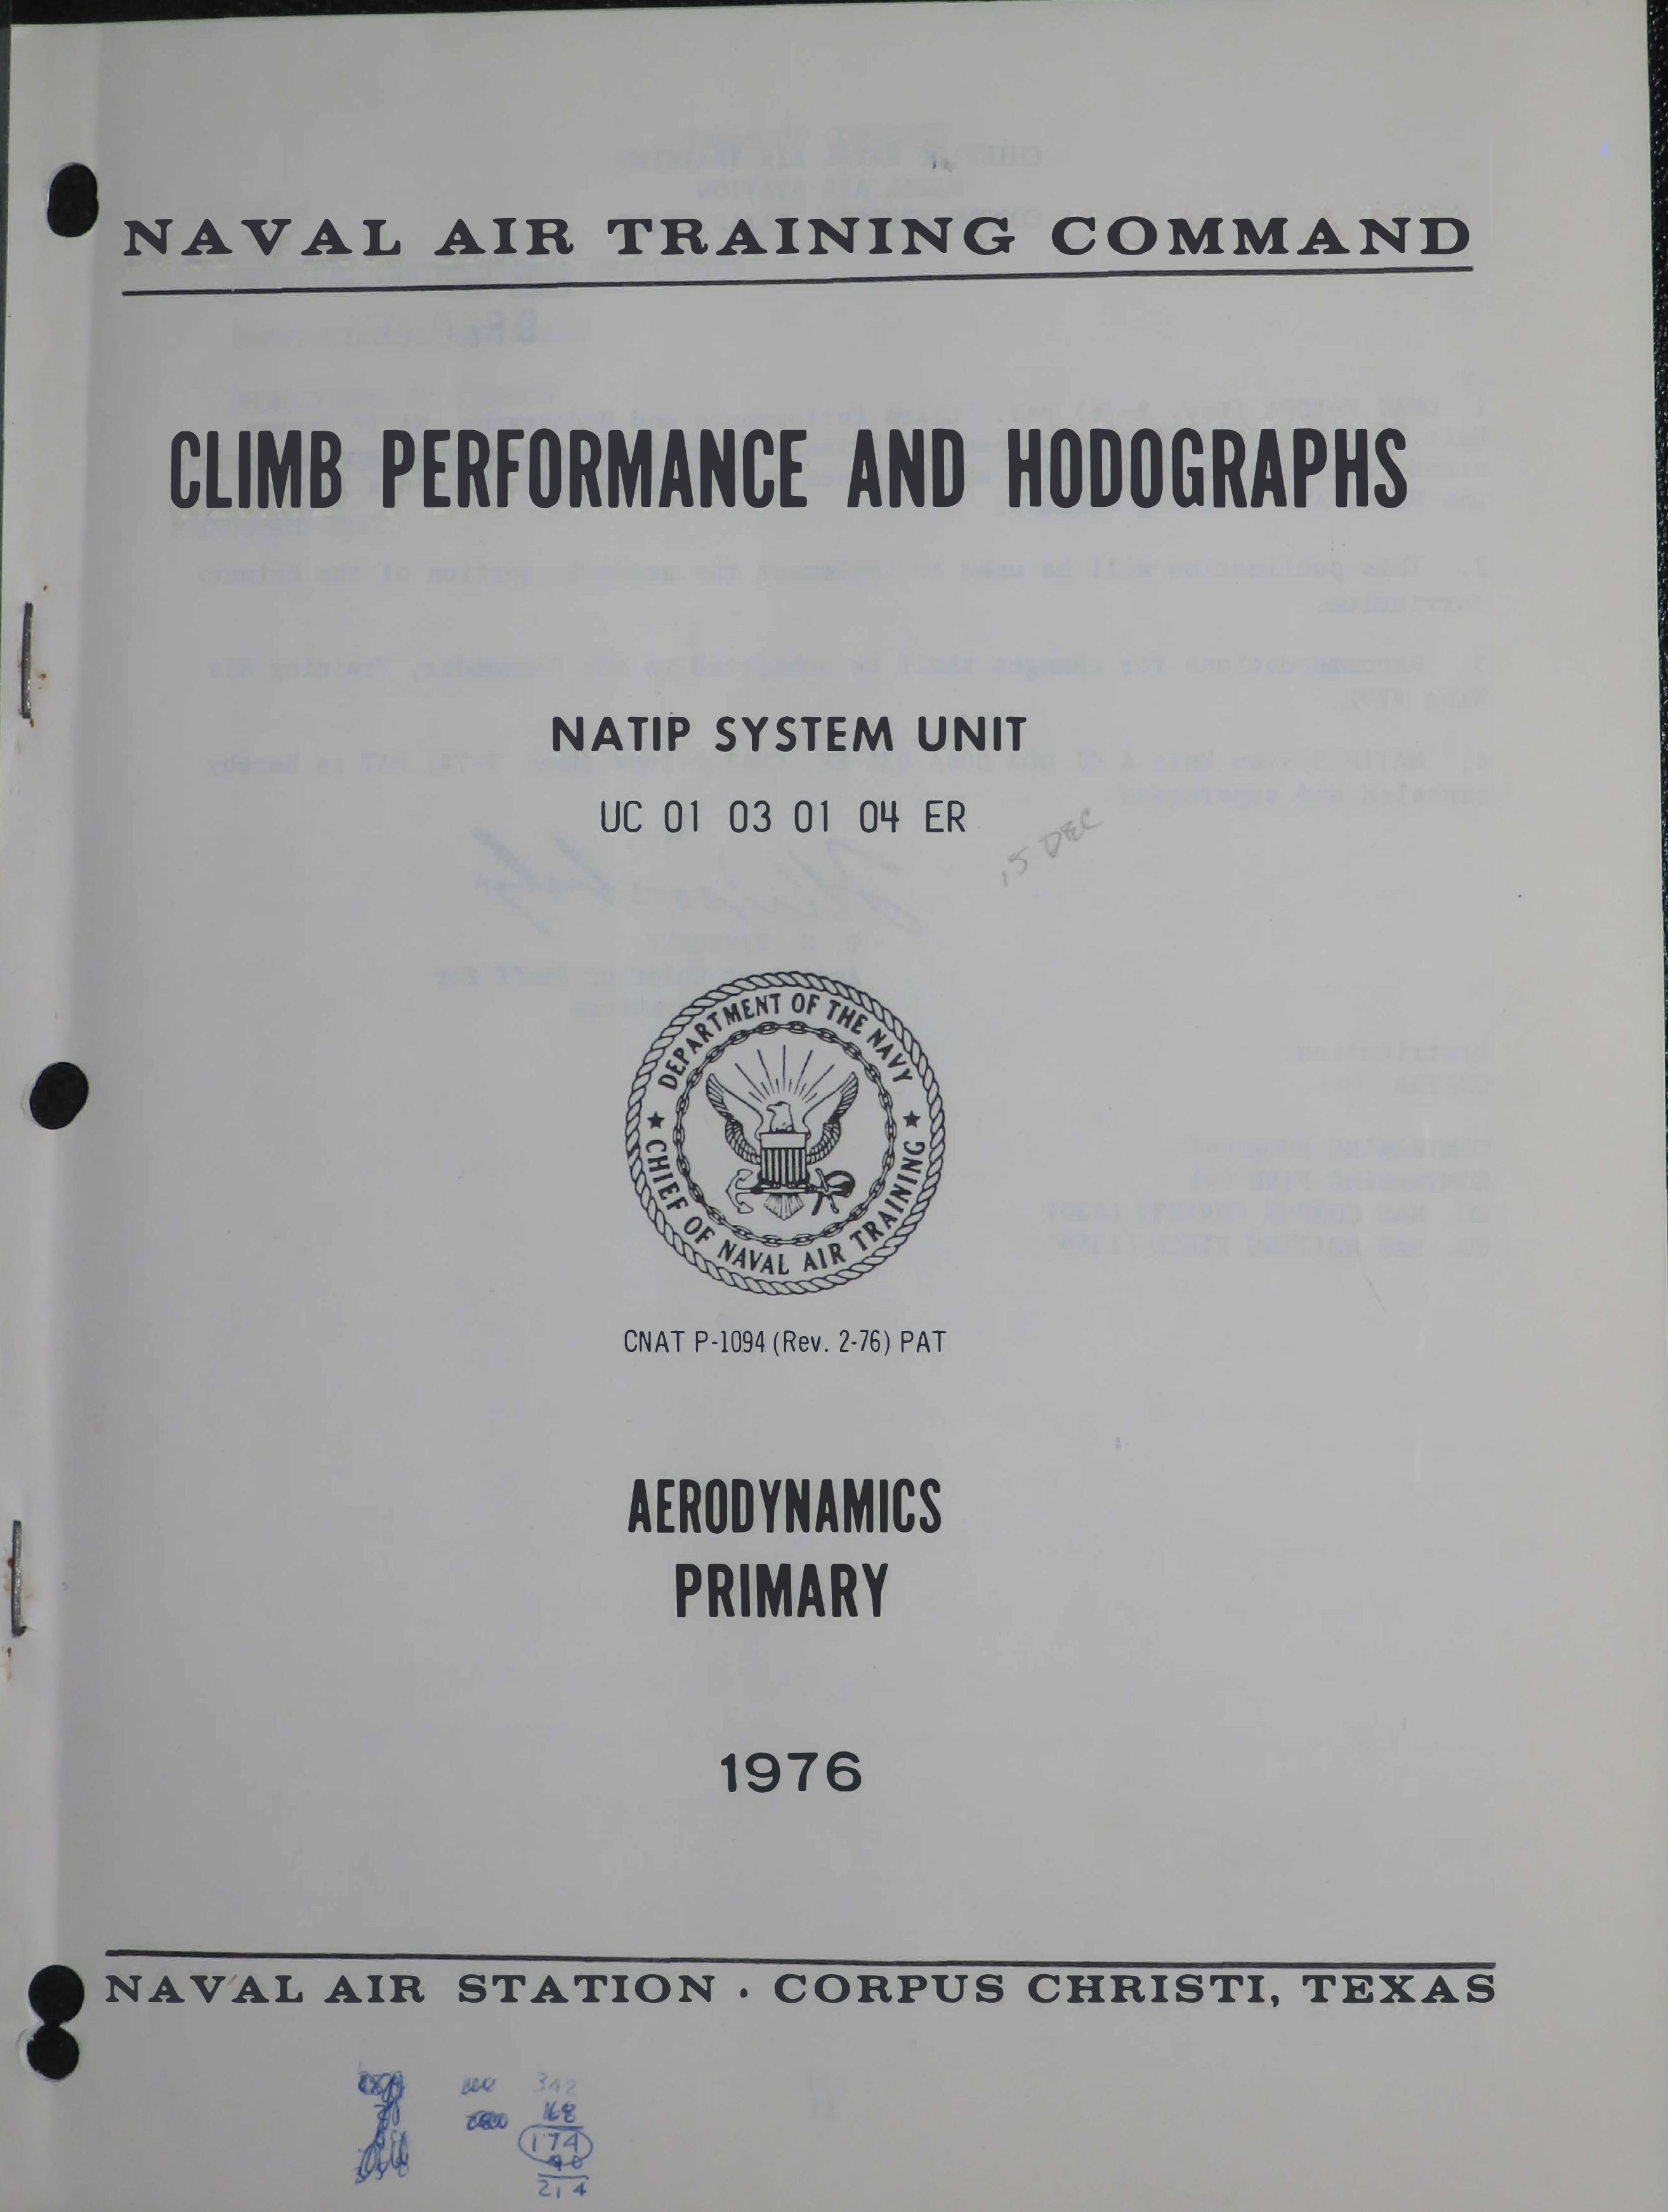 Sample page 1 from AirCorps Library document: Climb Performance and Hodographs